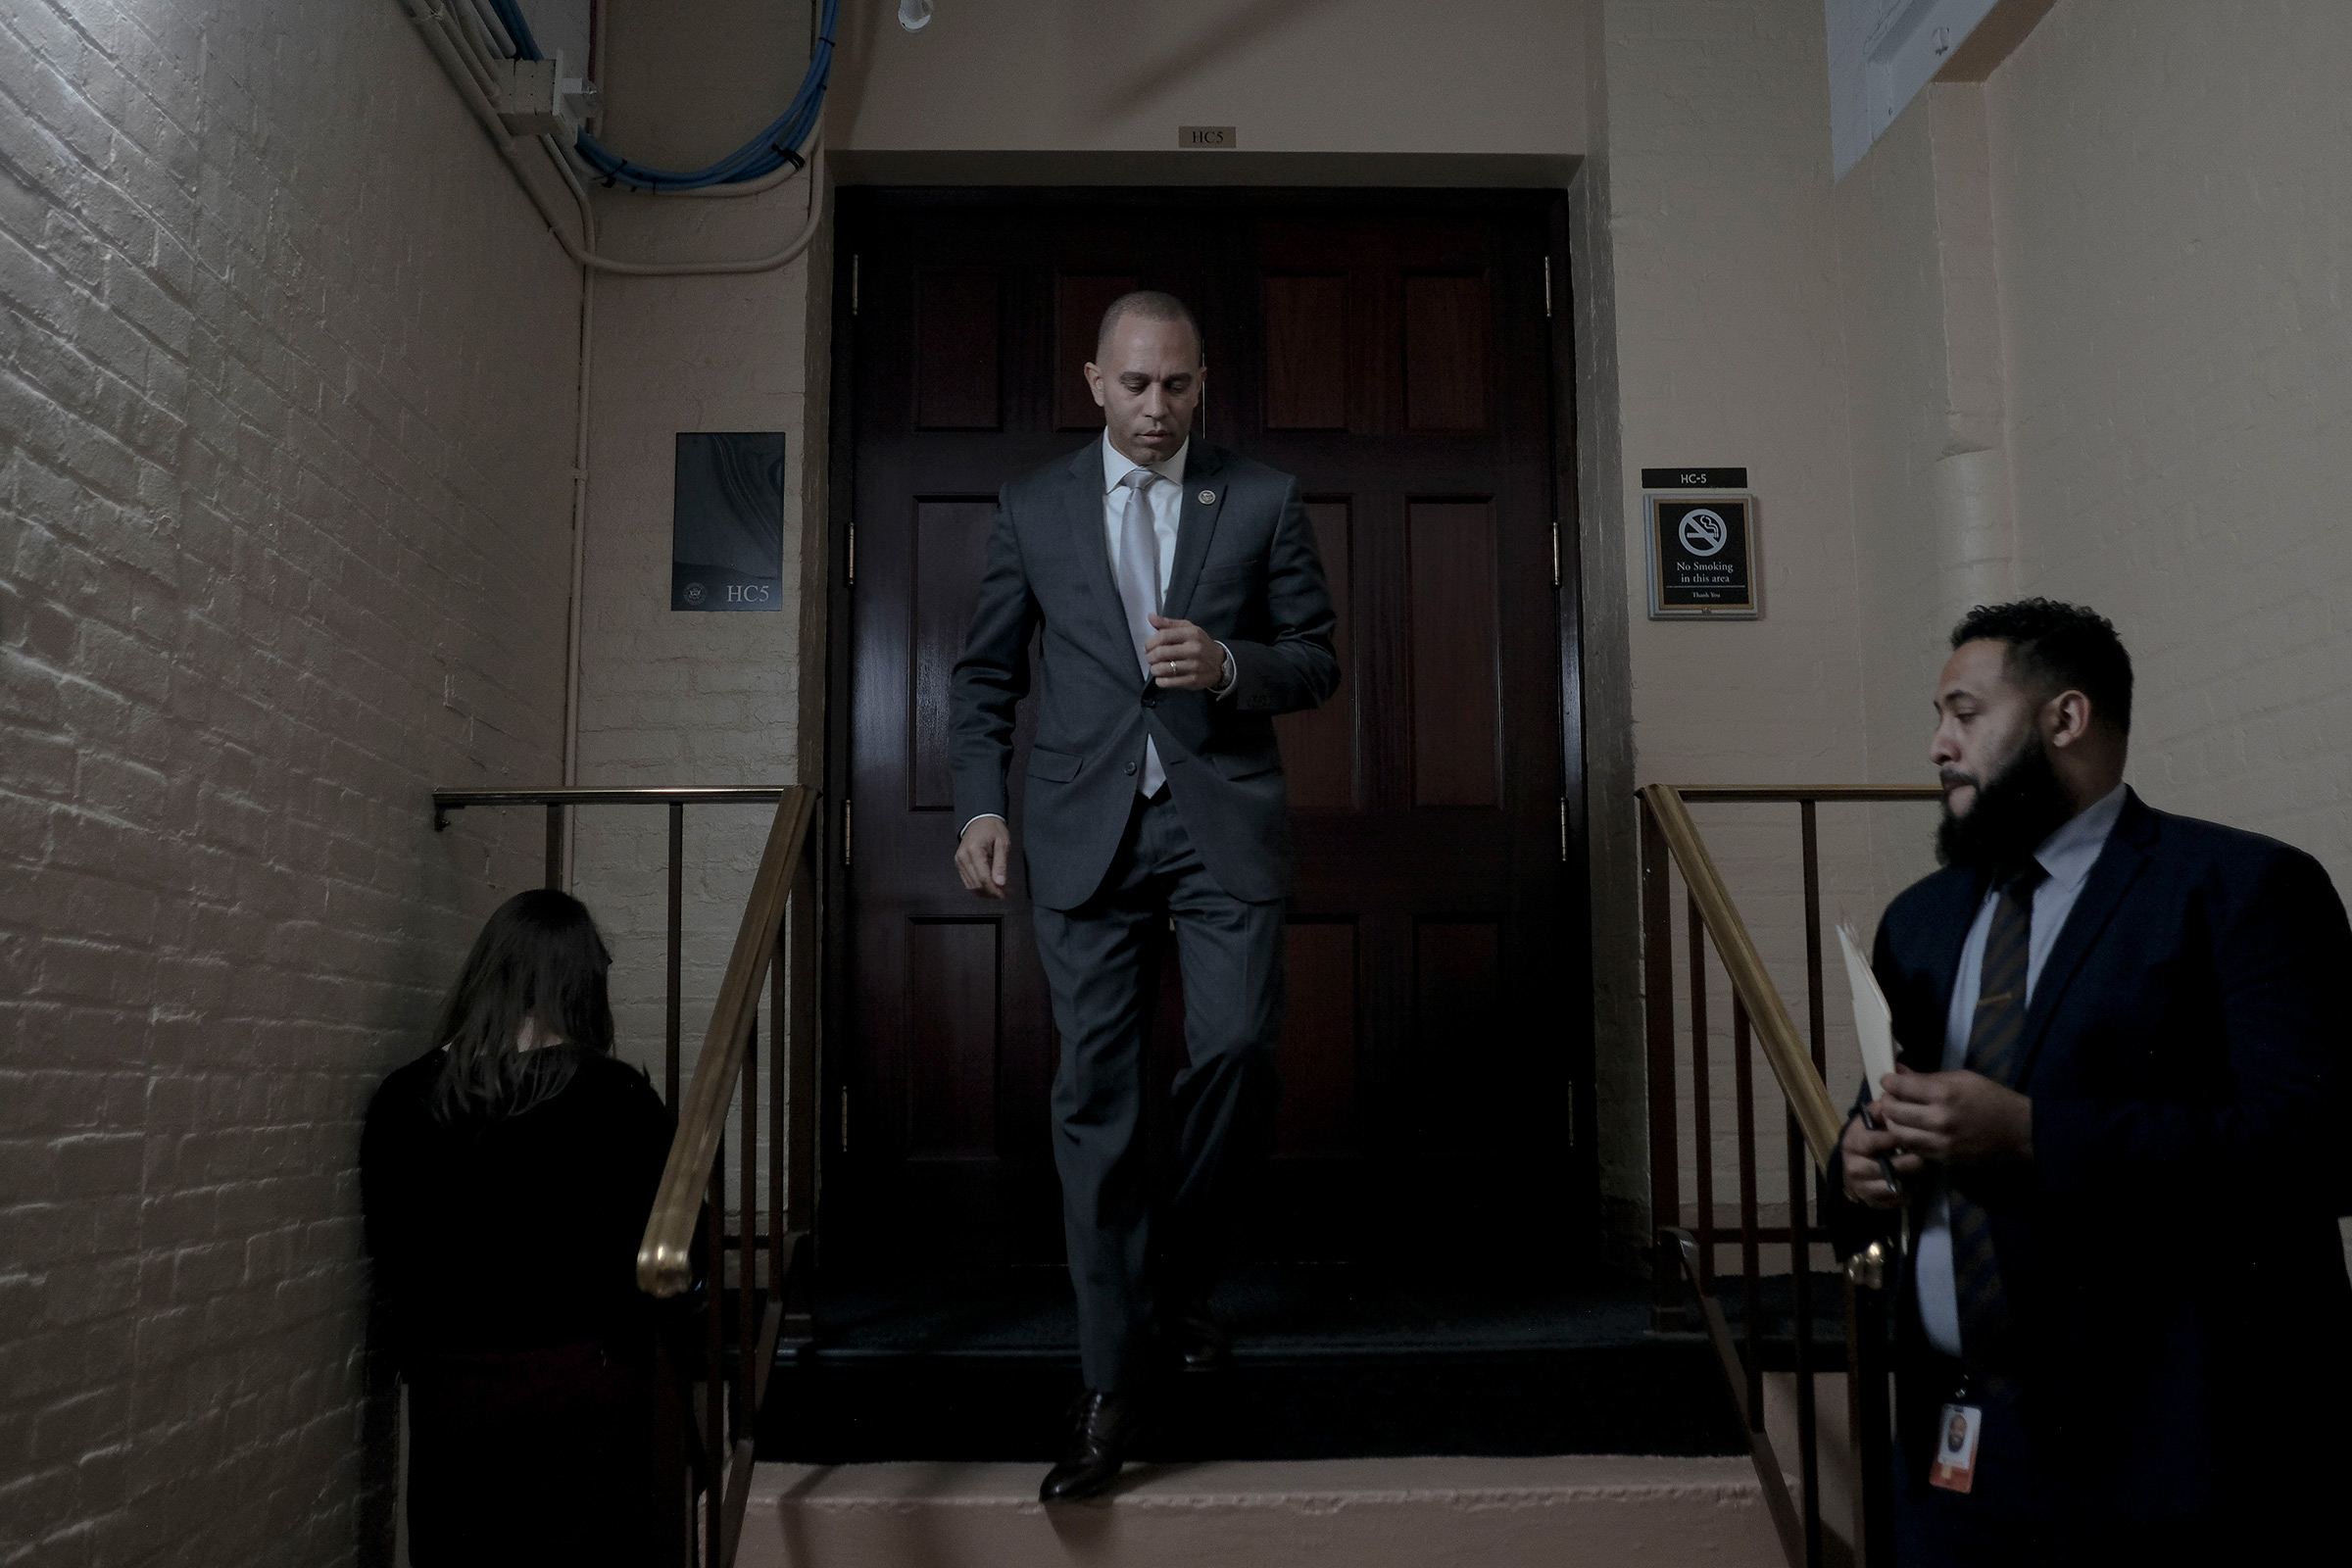 Democratic Caucus Chairman Hakeem Jeffries (D-N.Y.) leaves a meeting with the House Democratic Caucus in the basement of the Capitol in Washington, D.C., on Dec. 17, 2019. (Gabriella Demczuk for TIME)